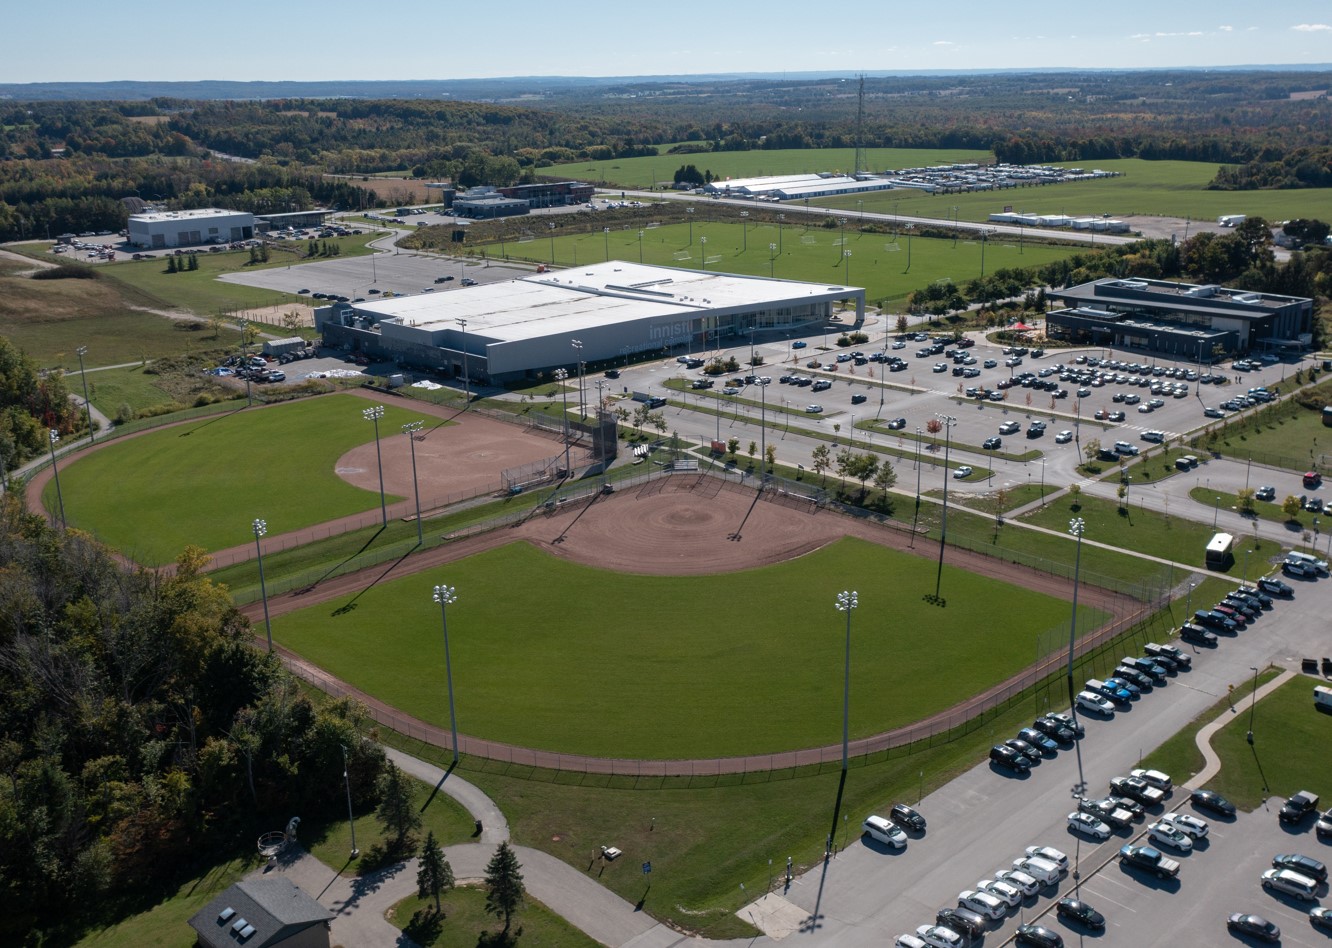 Aerial view of baseball diamonds and recreational building